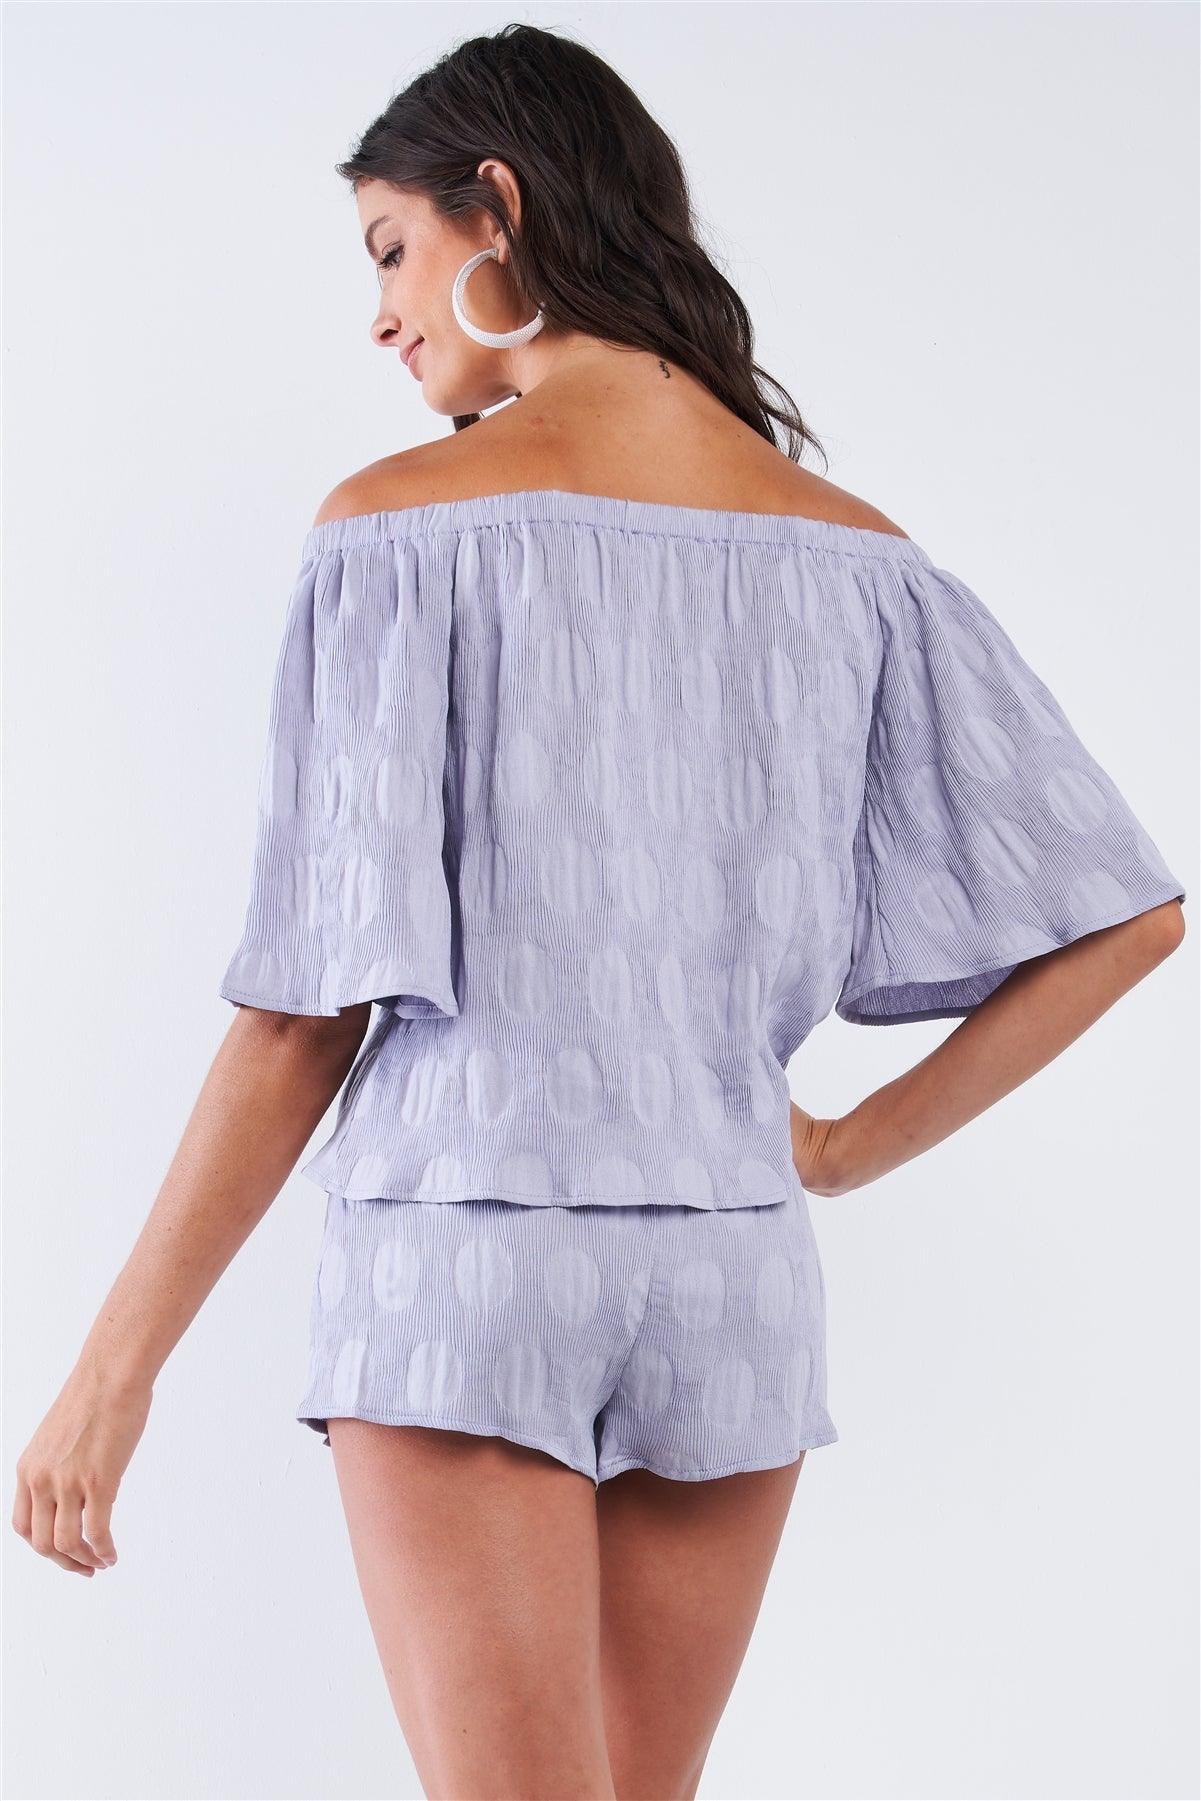 Solid Lavender Bluebell Sleeve Off-The-Shoulder Circle Pattern Loose Fit Pleated Top